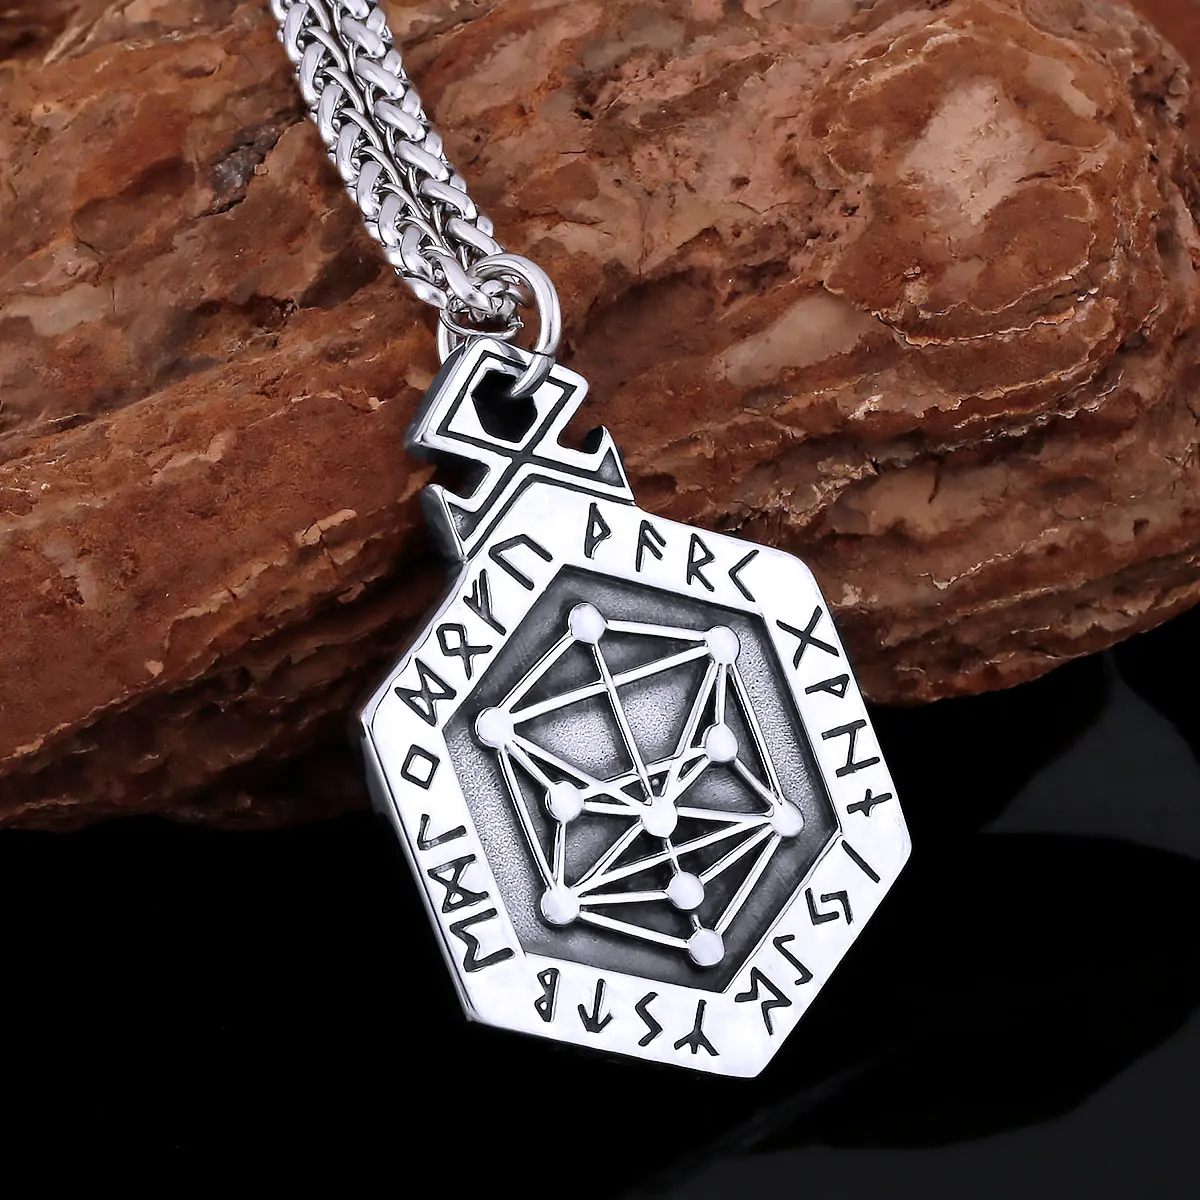 

Odin Rune Stainless Steel Viking Necklace Nordic Men's Celtic Knot Amulet Rune Fashion Pendant Compass Locomotive Jewelry Gift